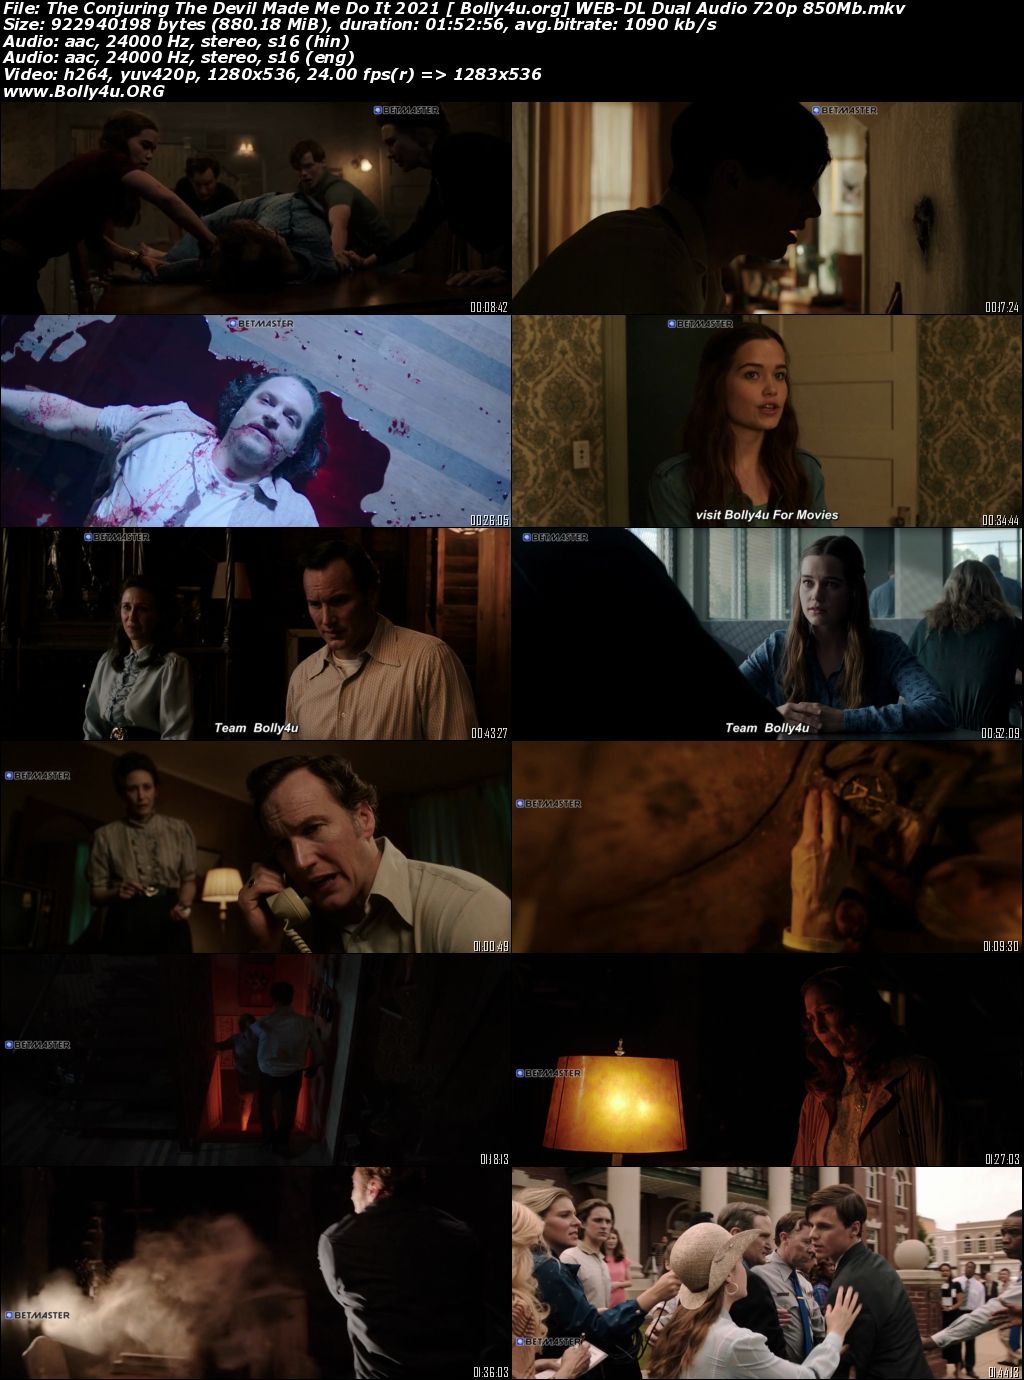 The Conjuring The Devil Made Me Do It 2021 WEB-DL 850MB Hindi CAM Dual Audio 720p Download